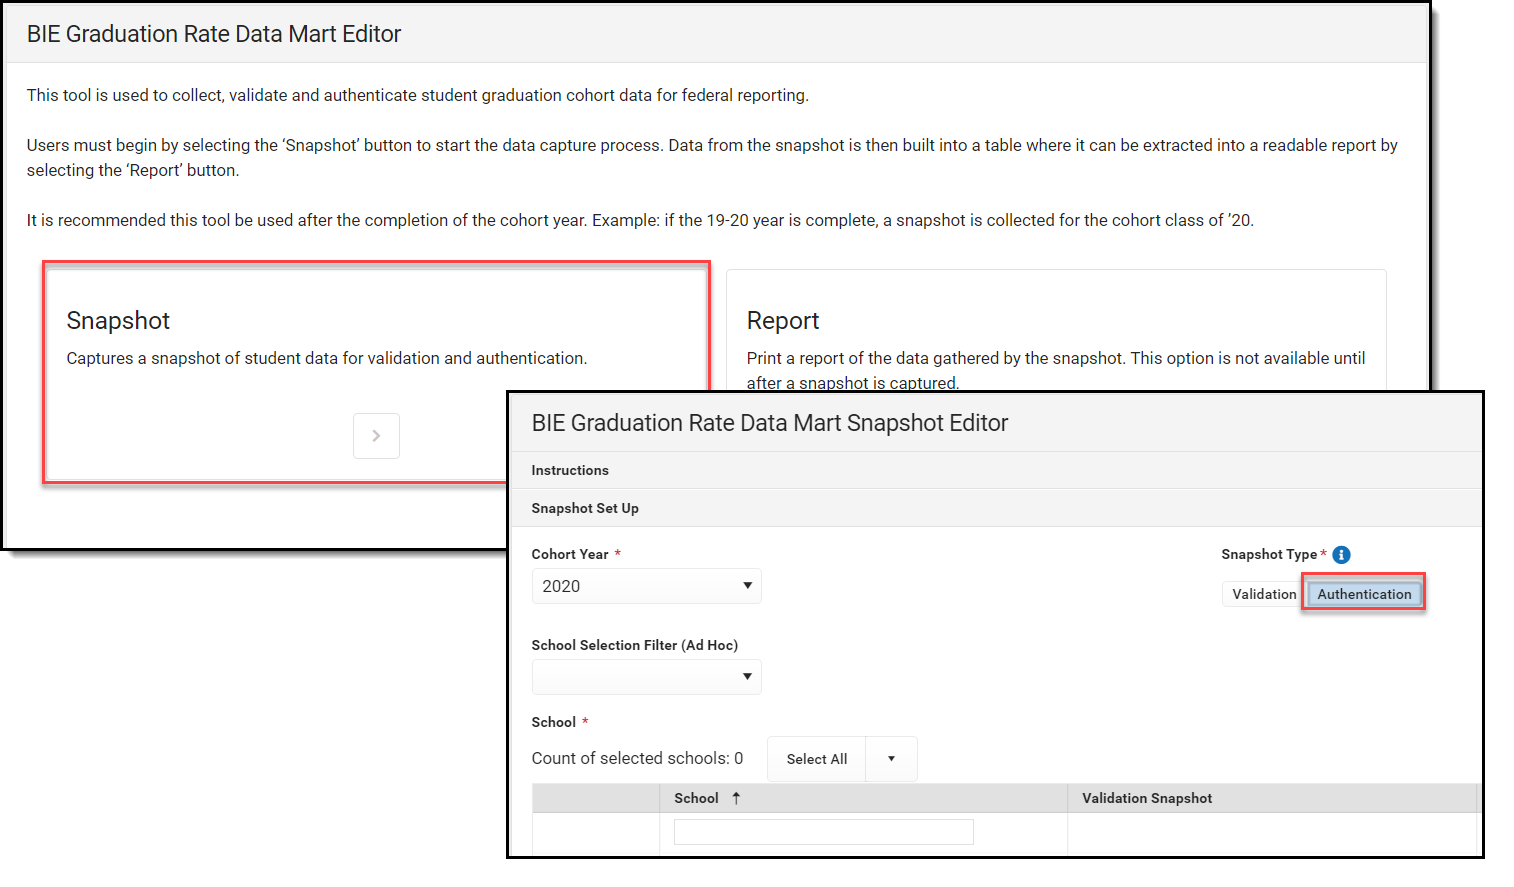 Screenshot of the Graduation Rate Data Mart Snapshot Editor with Authentication type highlighted